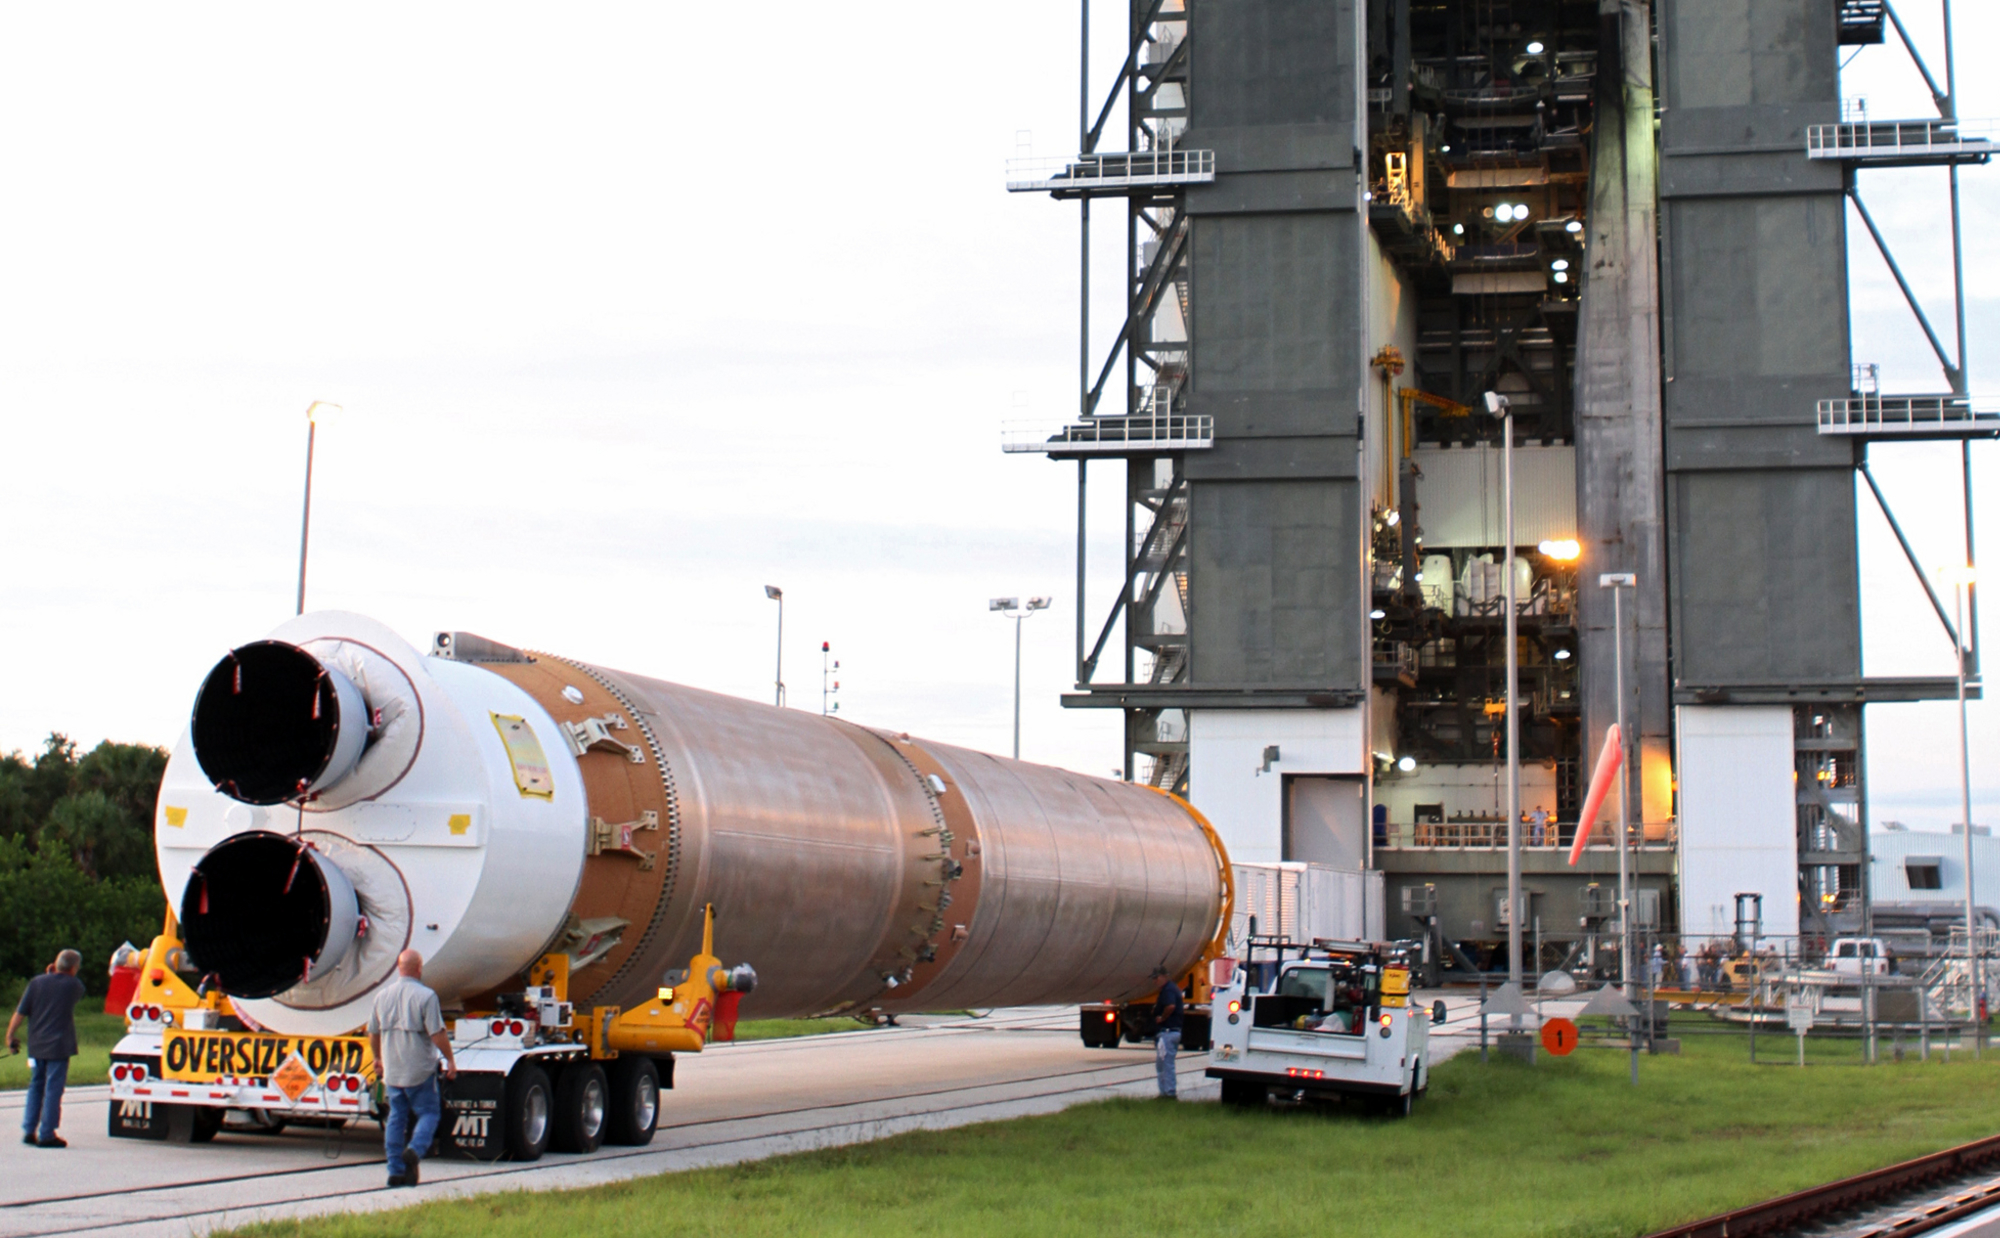 The first stage of the Atlas V rocket for NASA's Mars Science Laboratory (MSL) mission arrives at the Vertical Integration Facility at Space Launch Complex 41 on Cape Canaveral Air Force Station.